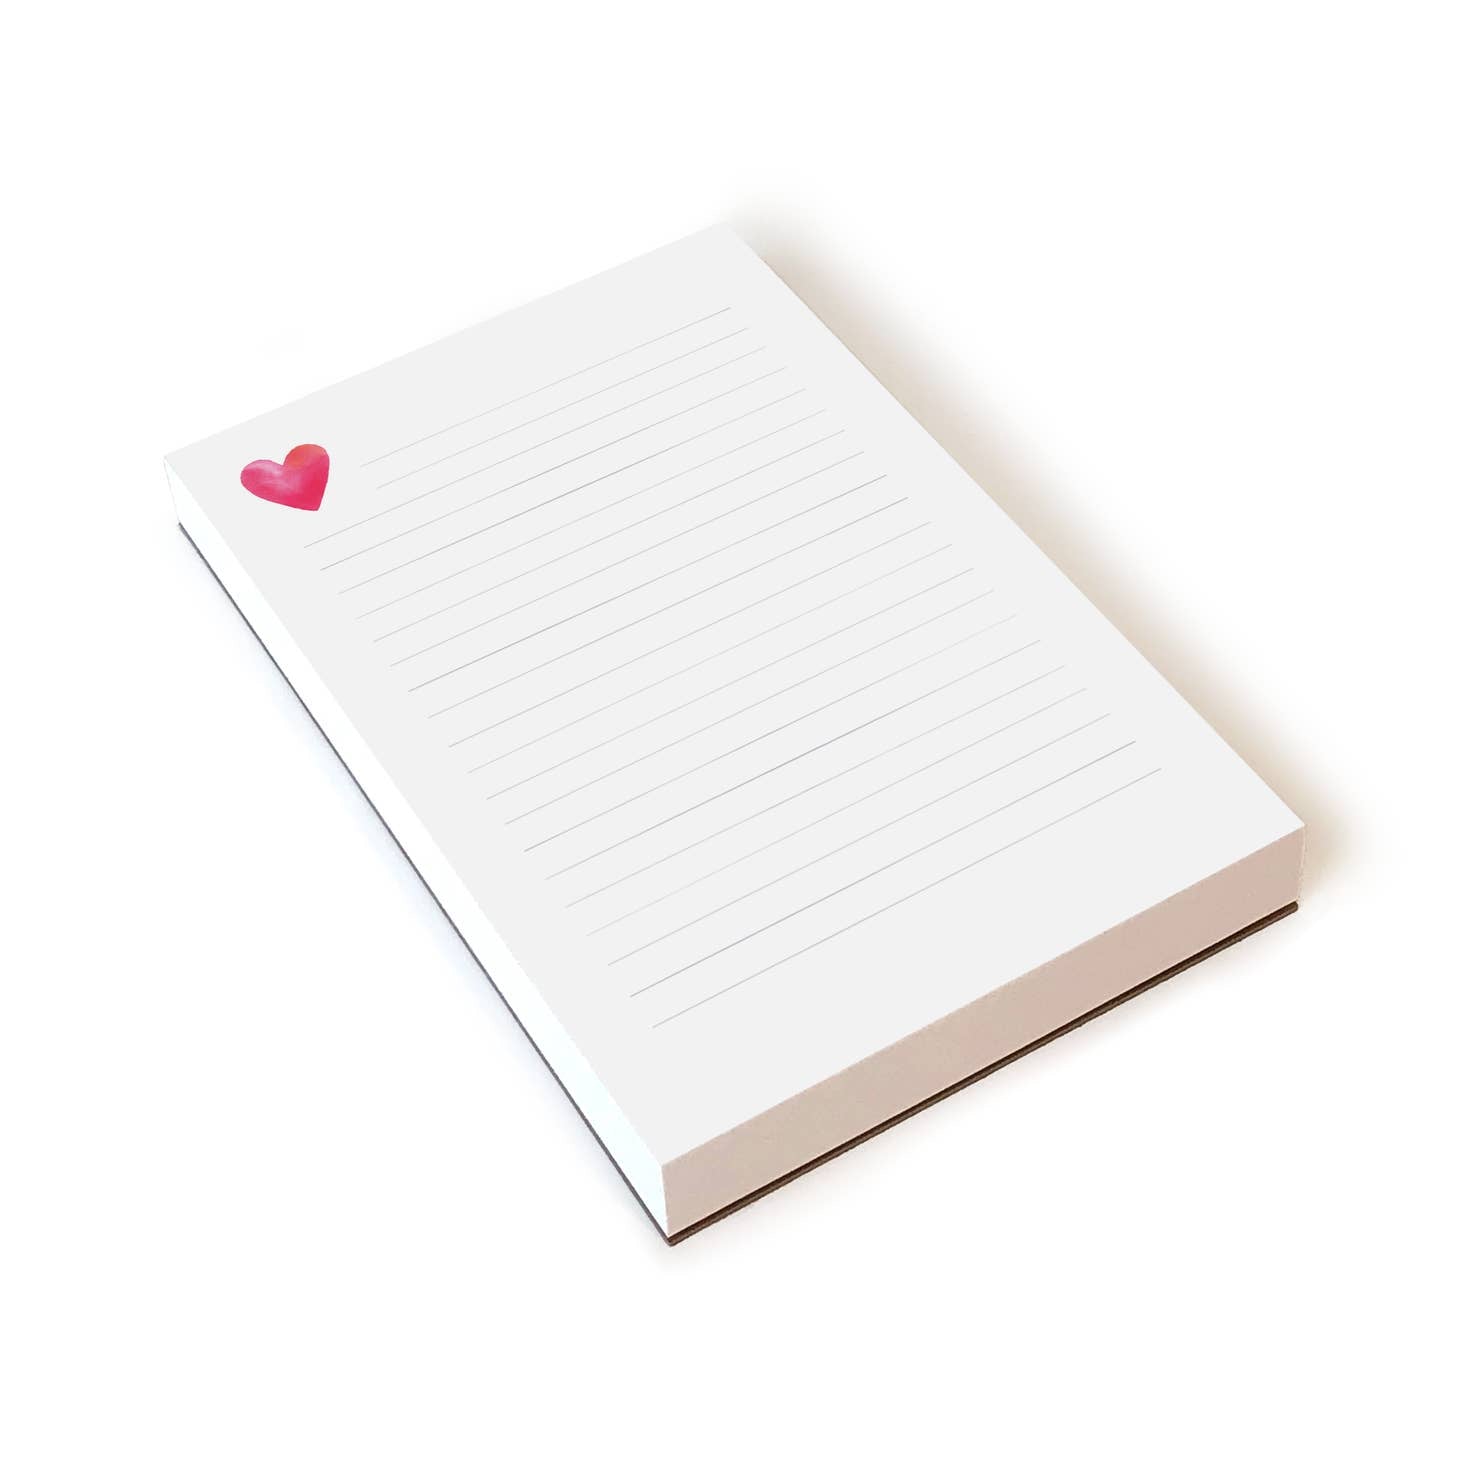 Lined Notepad, Heart Lined